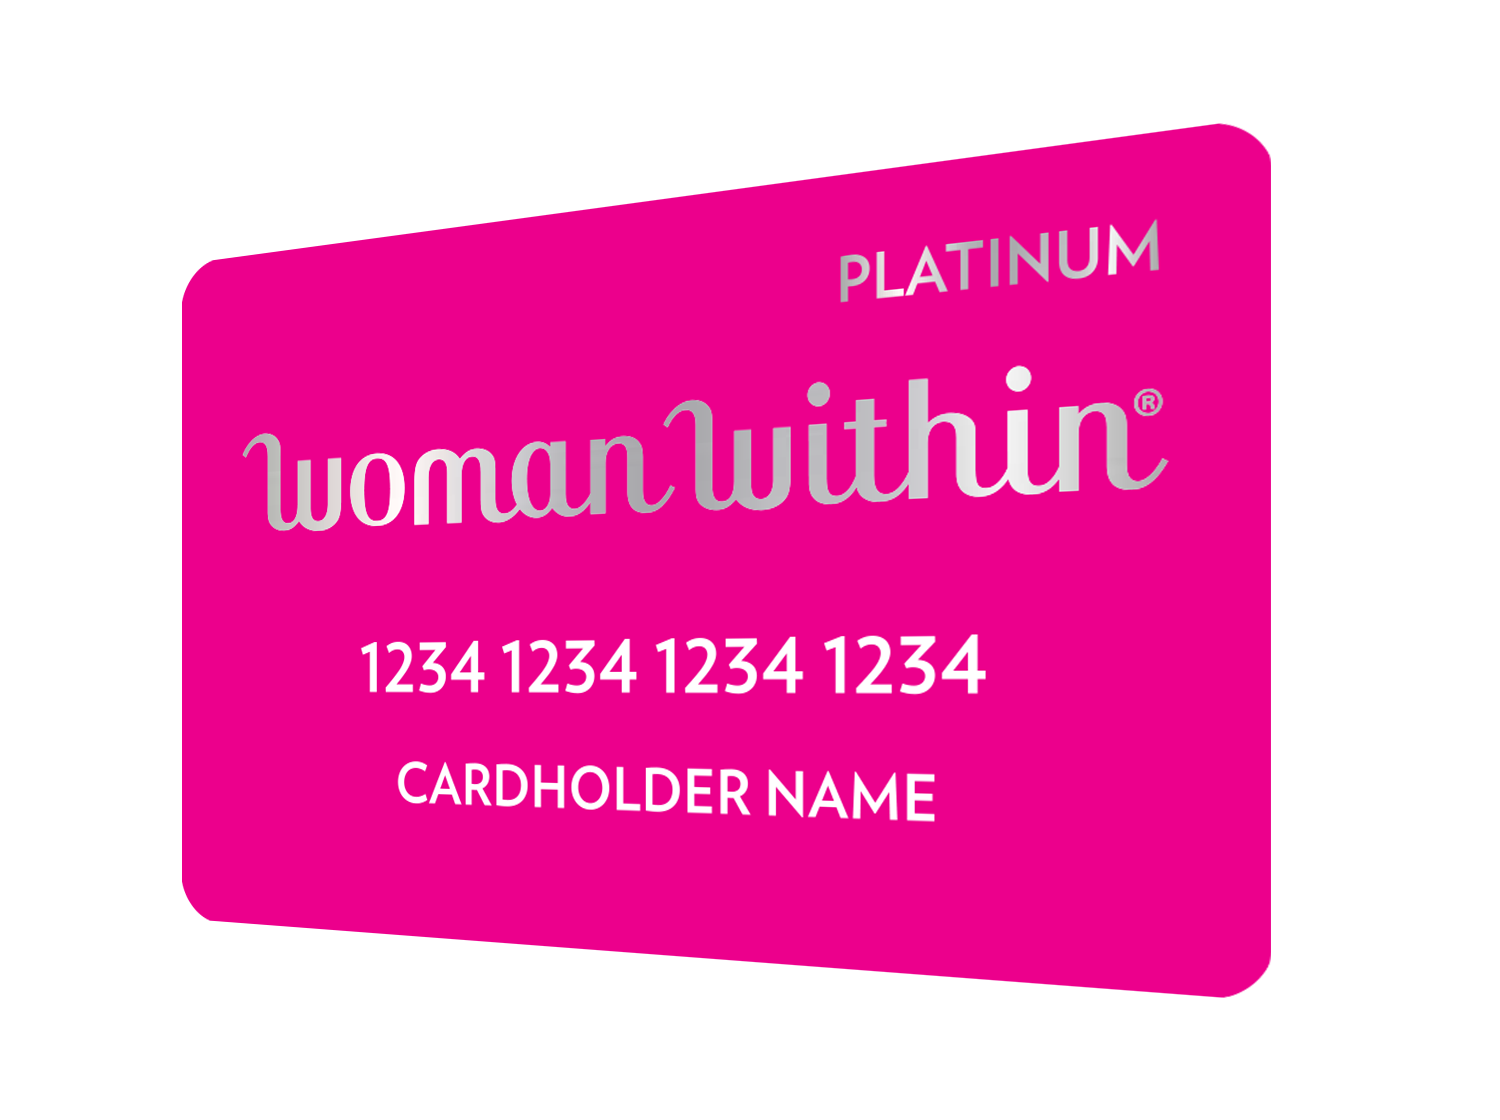 Woman Within Platinum Credit Card